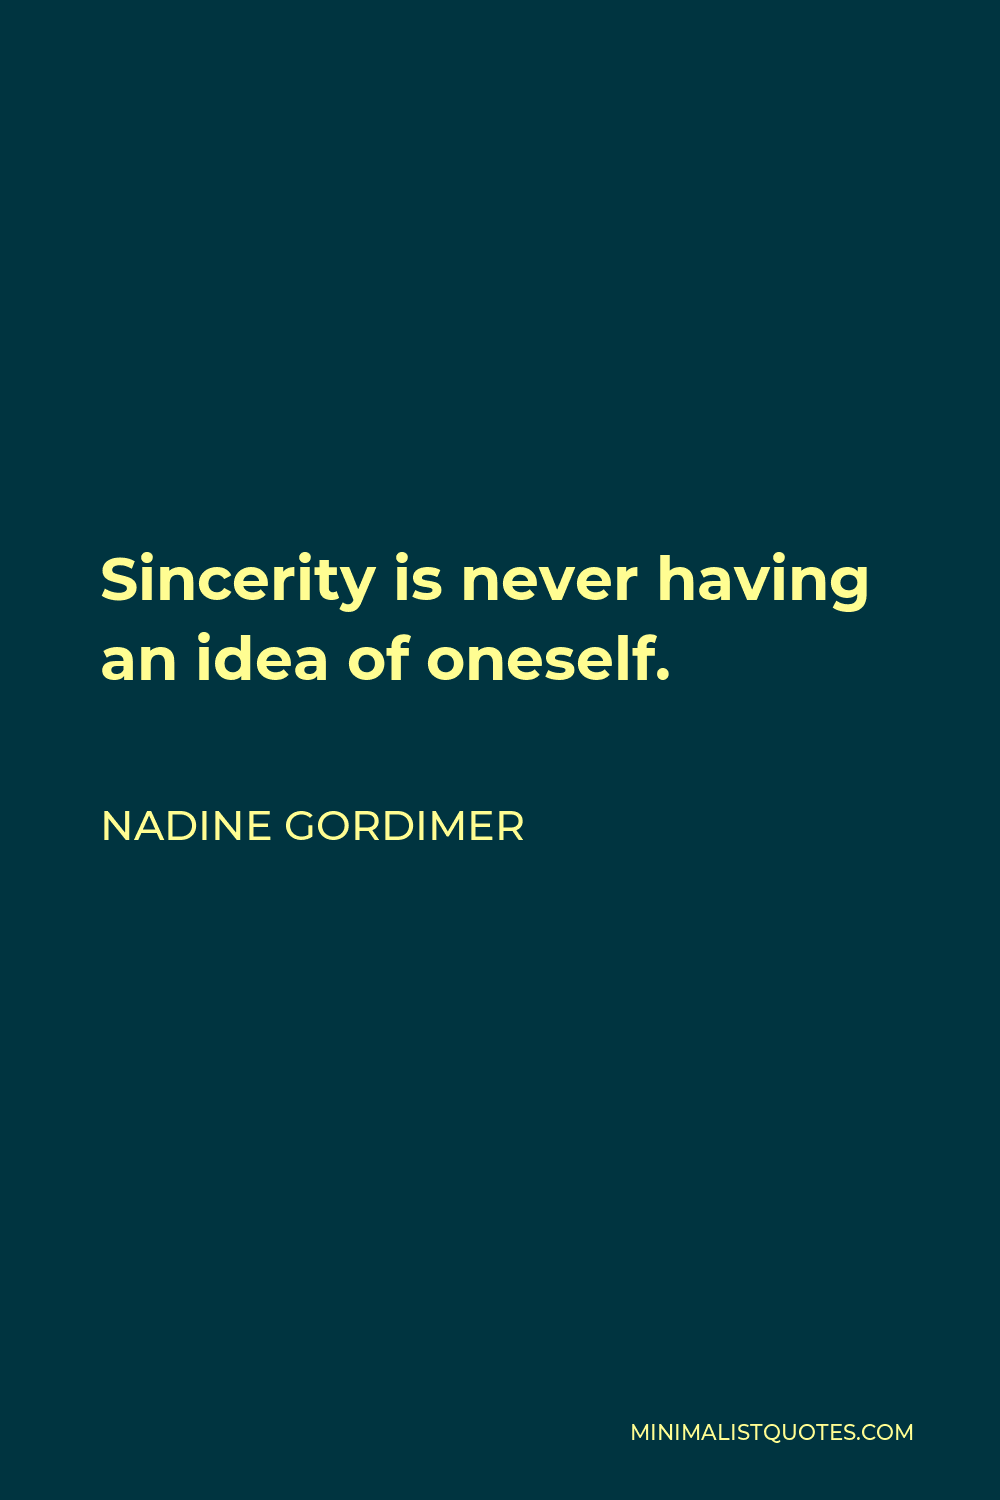 Nadine Gordimer Quote - Sincerity is never having an idea of oneself.